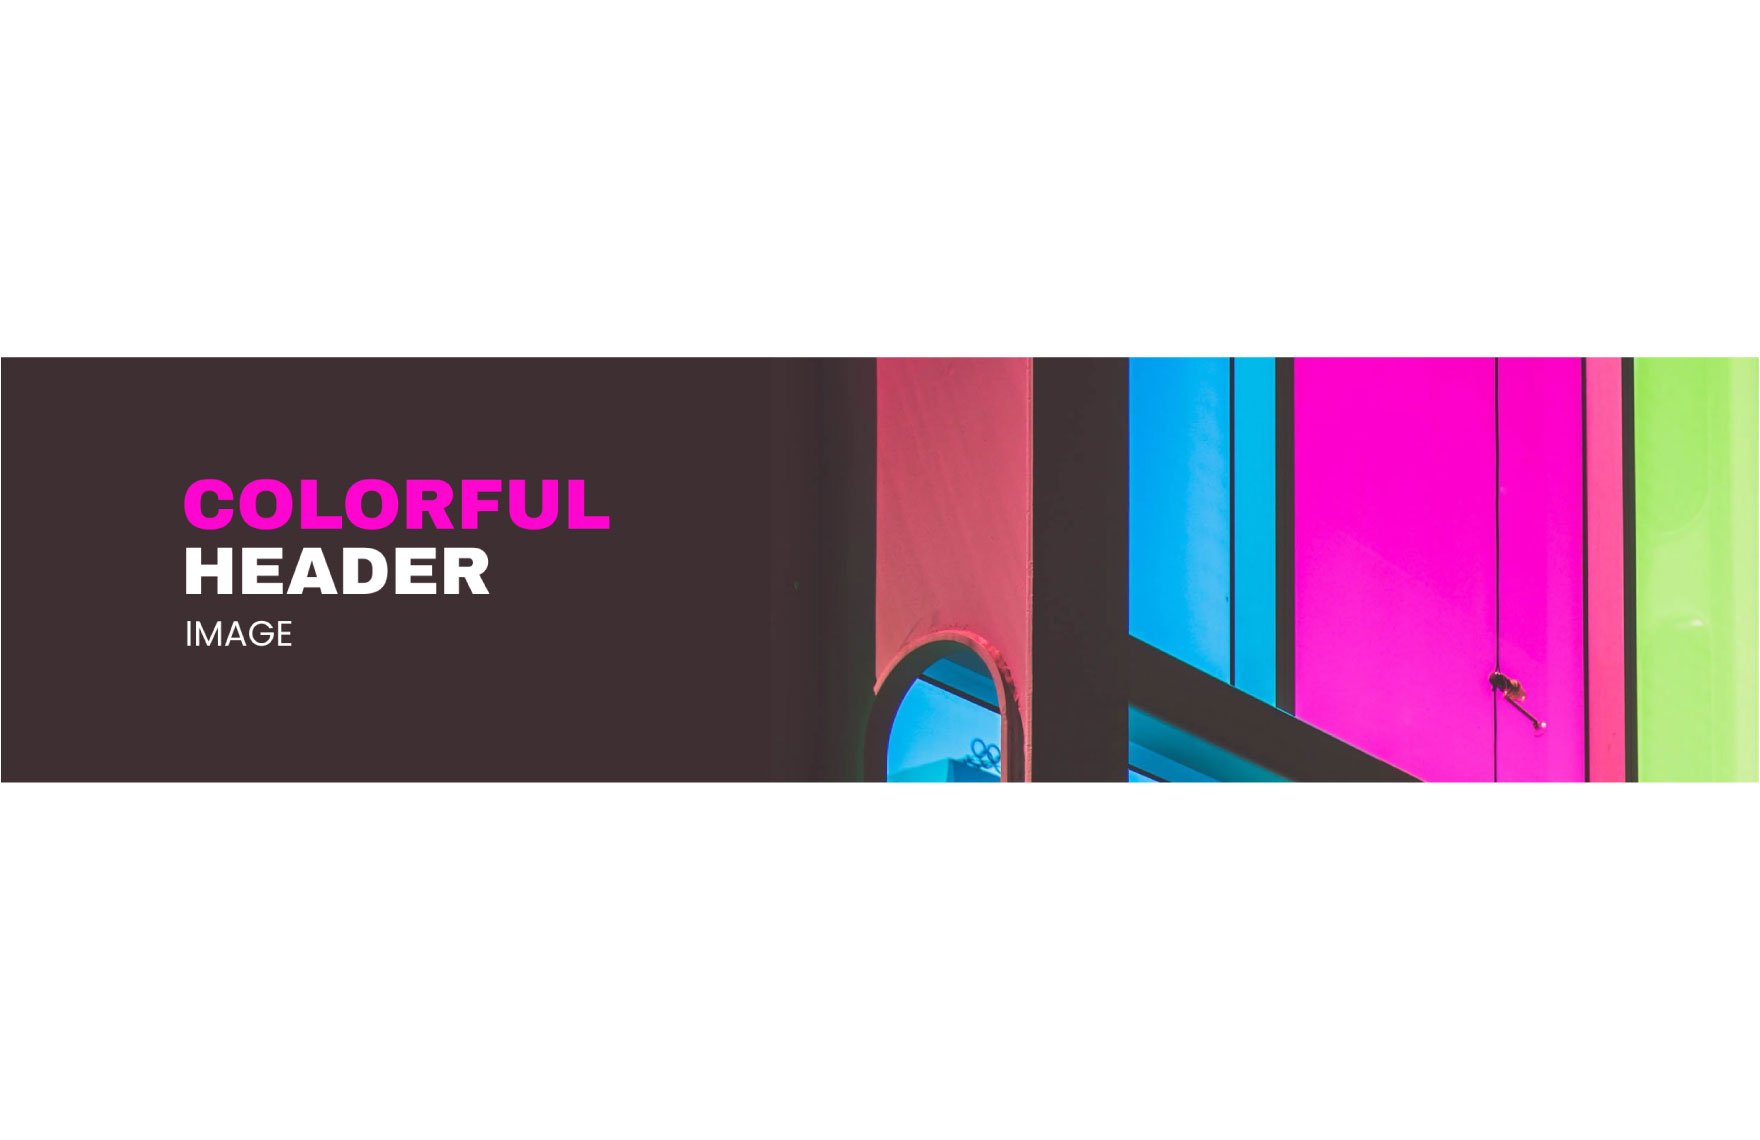 Colorful Header Image 